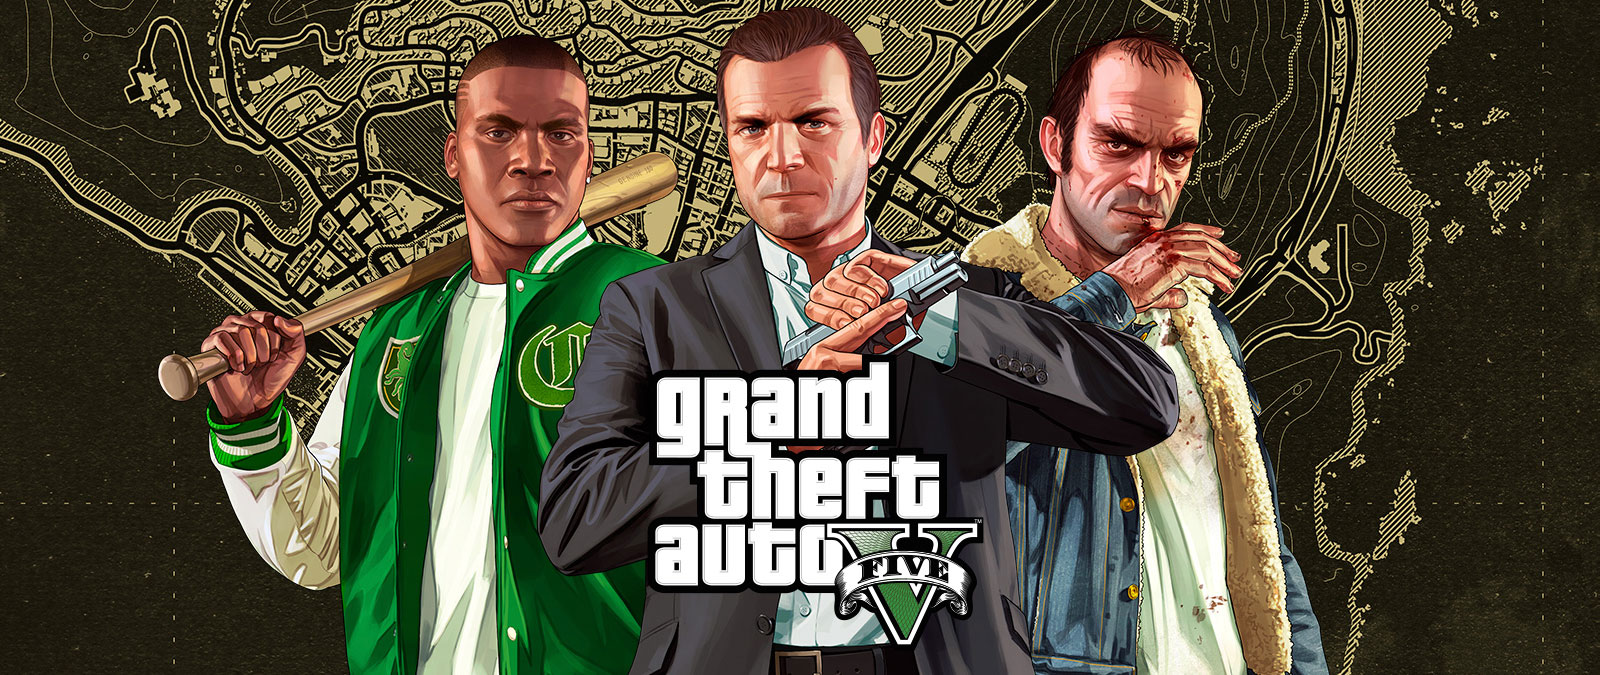 Grand Theft Auto V, Franklin Clinton, Michael de Santa, and Trevor Phillips stand in front of a map of Los Santos